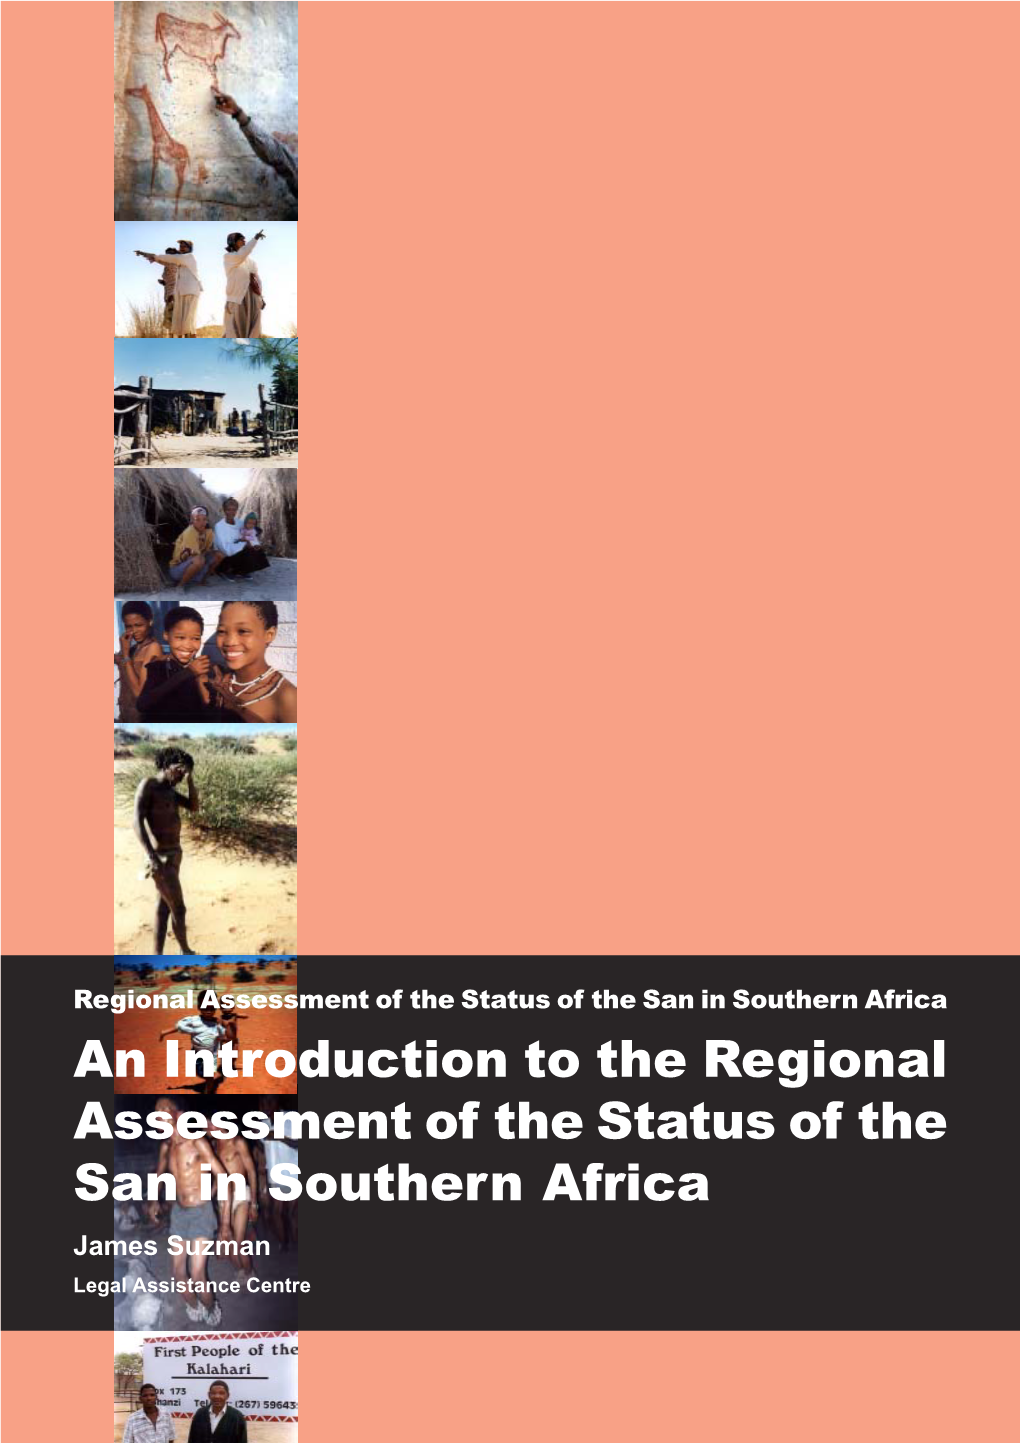 Regional Assessment of the Status of the San in Southern Africa